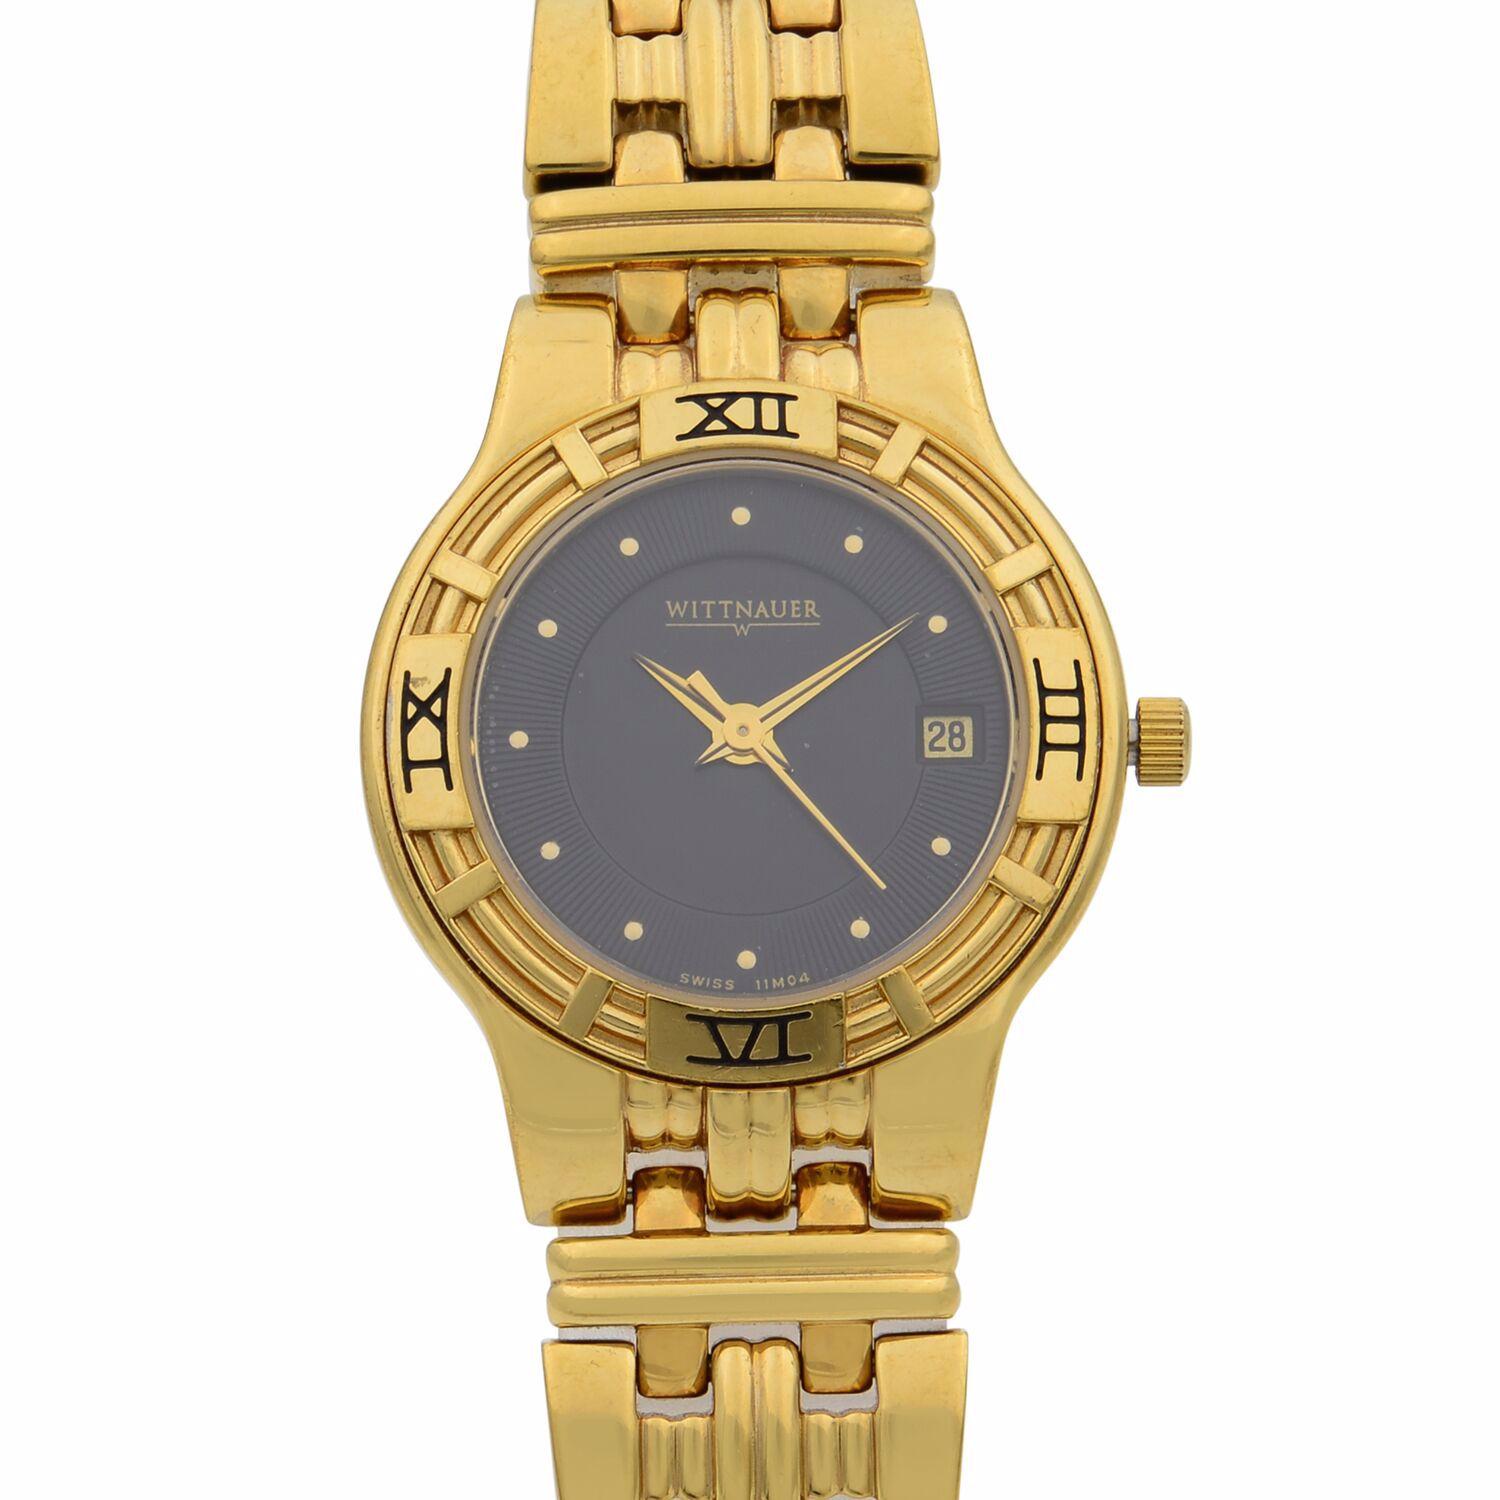 Pre-owned Wittnauer 25mm Gold Tone Steel Date Black Dial Ladies Quartz Watch 11M04. Minor scratches and blemishes on back case on case and on band. This Beautiful Timepiece is Powered by a Quartz (Battery) Movement and Features: Gold-Tone Stainless